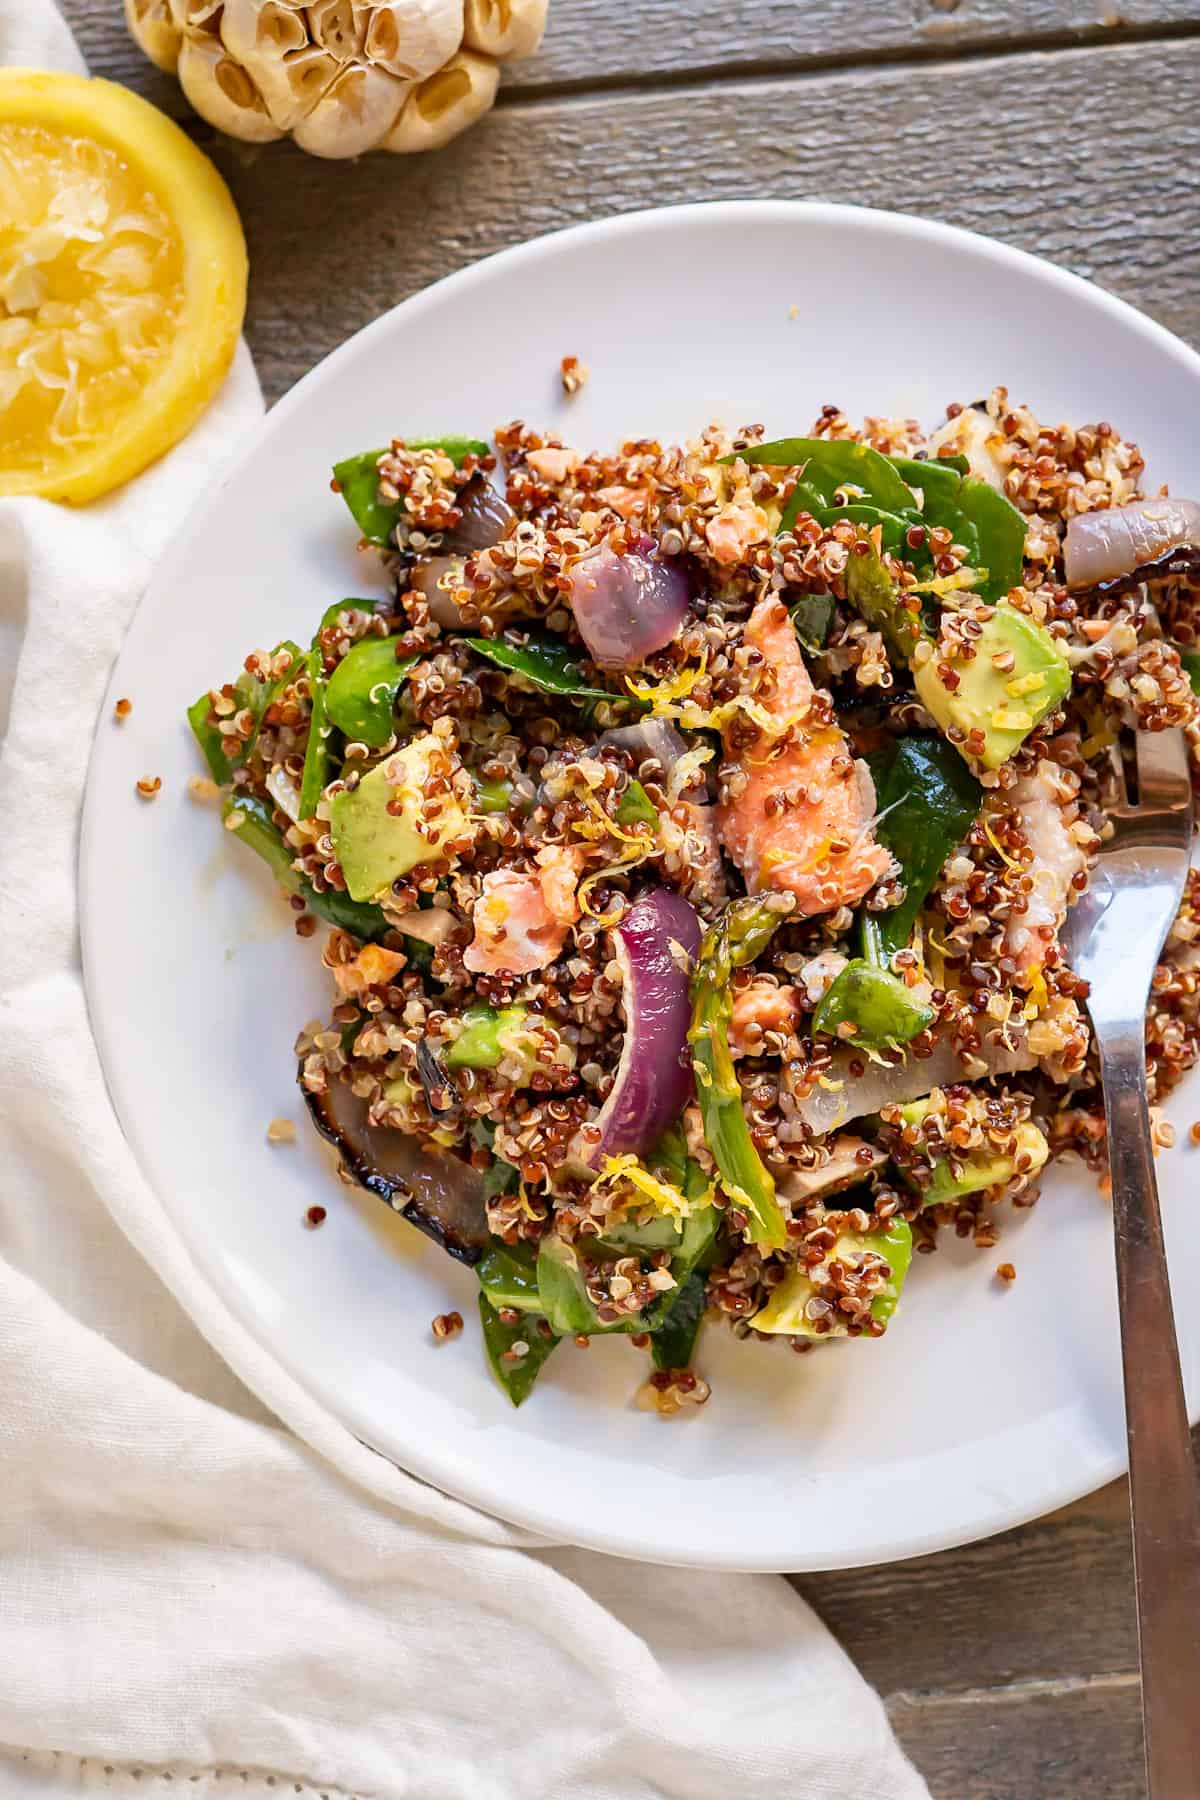 A large meal-sized serving of salmon quinoa salad on a plate.